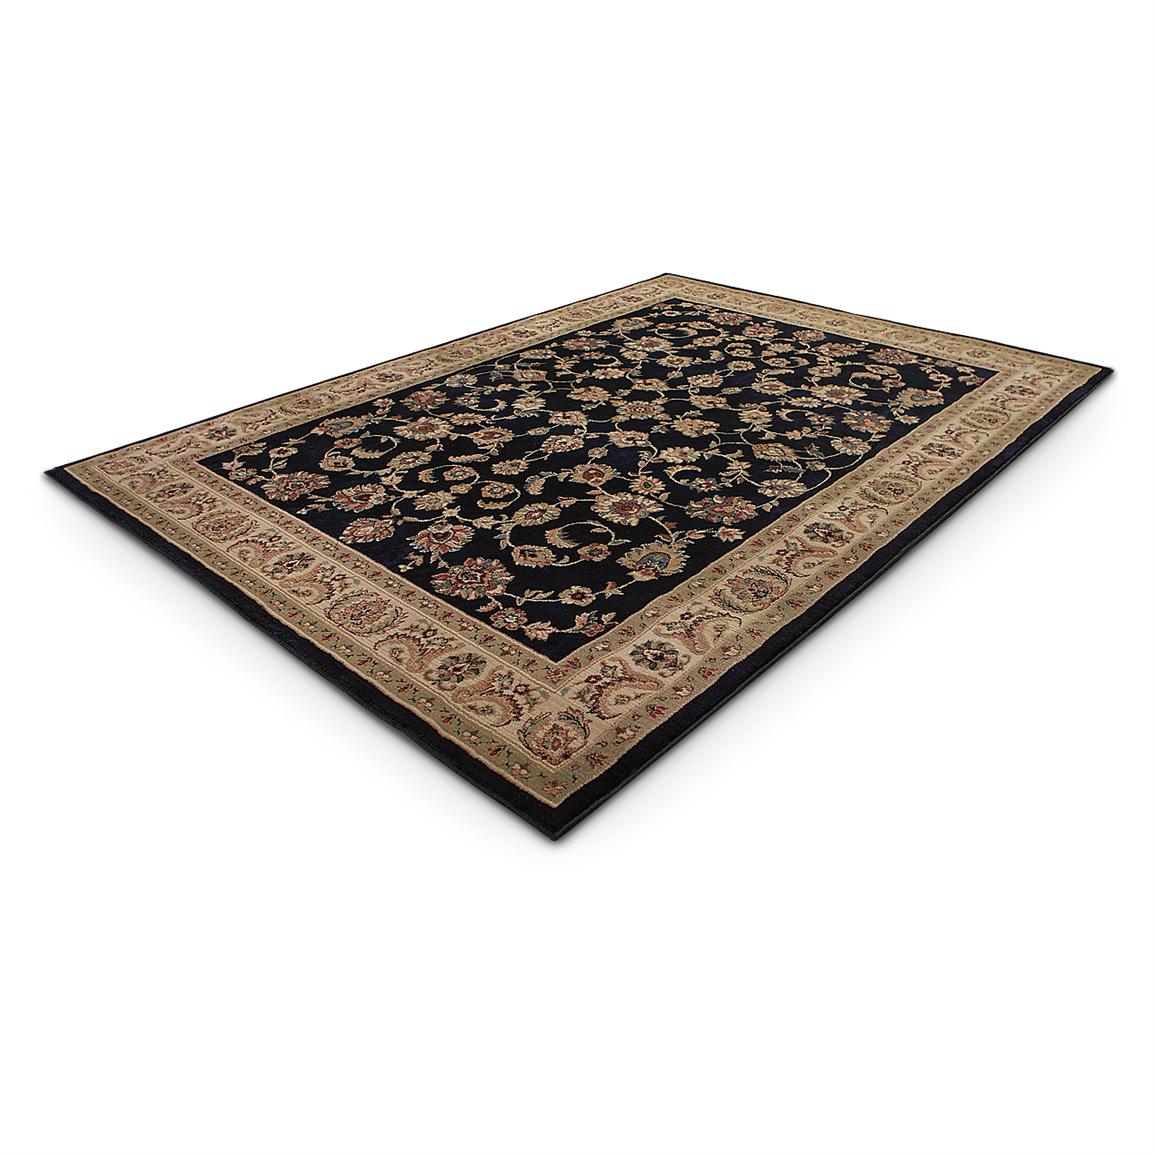 Luxor® Sphinx 8x11' Area Rug - 192885, Rugs at Sportsman's Guide